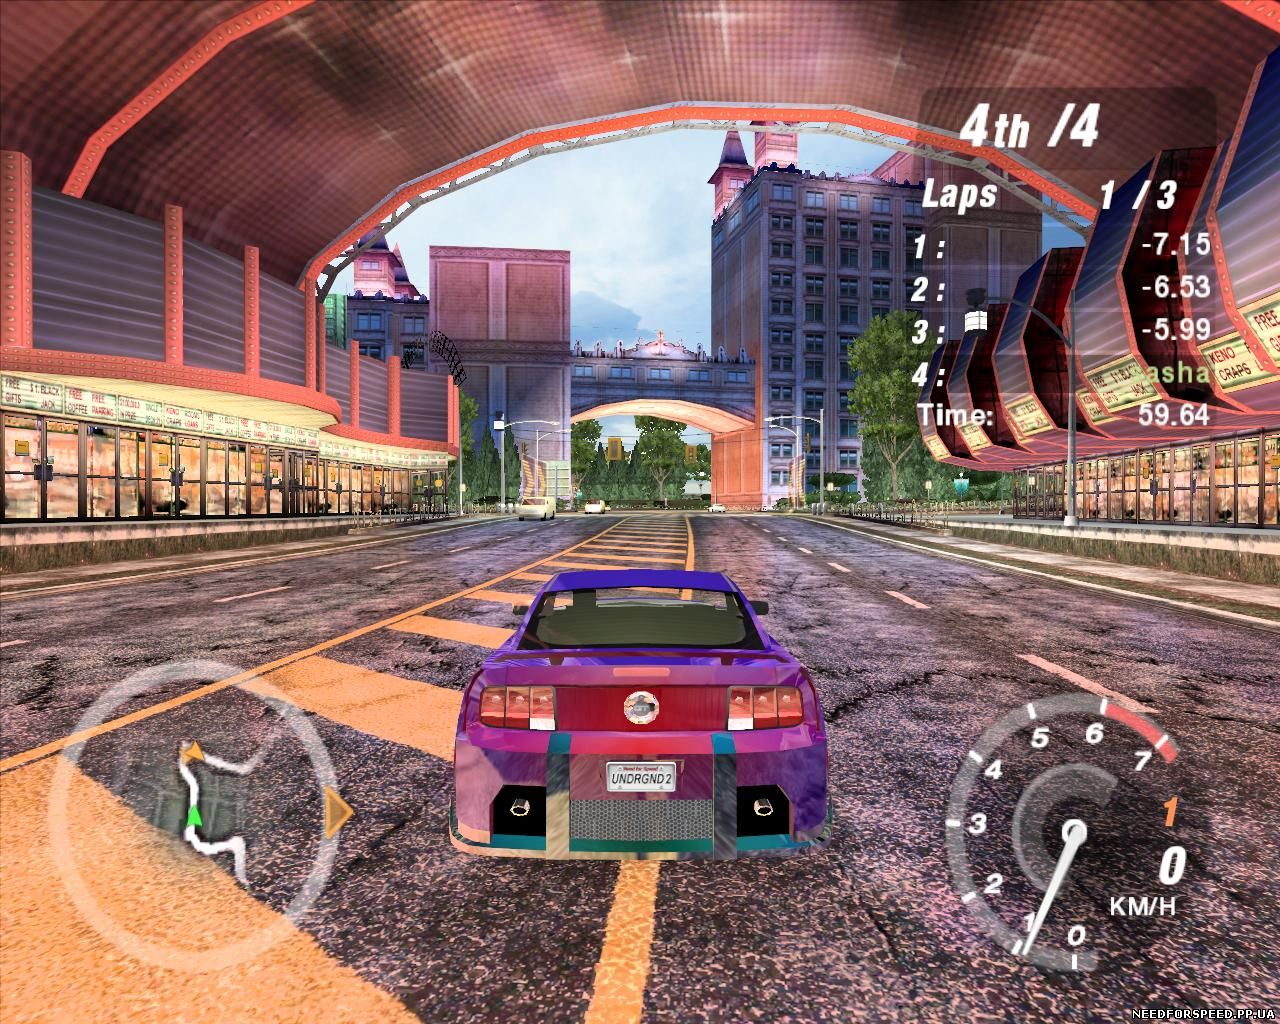 NFSU2 [2004] The Other Side